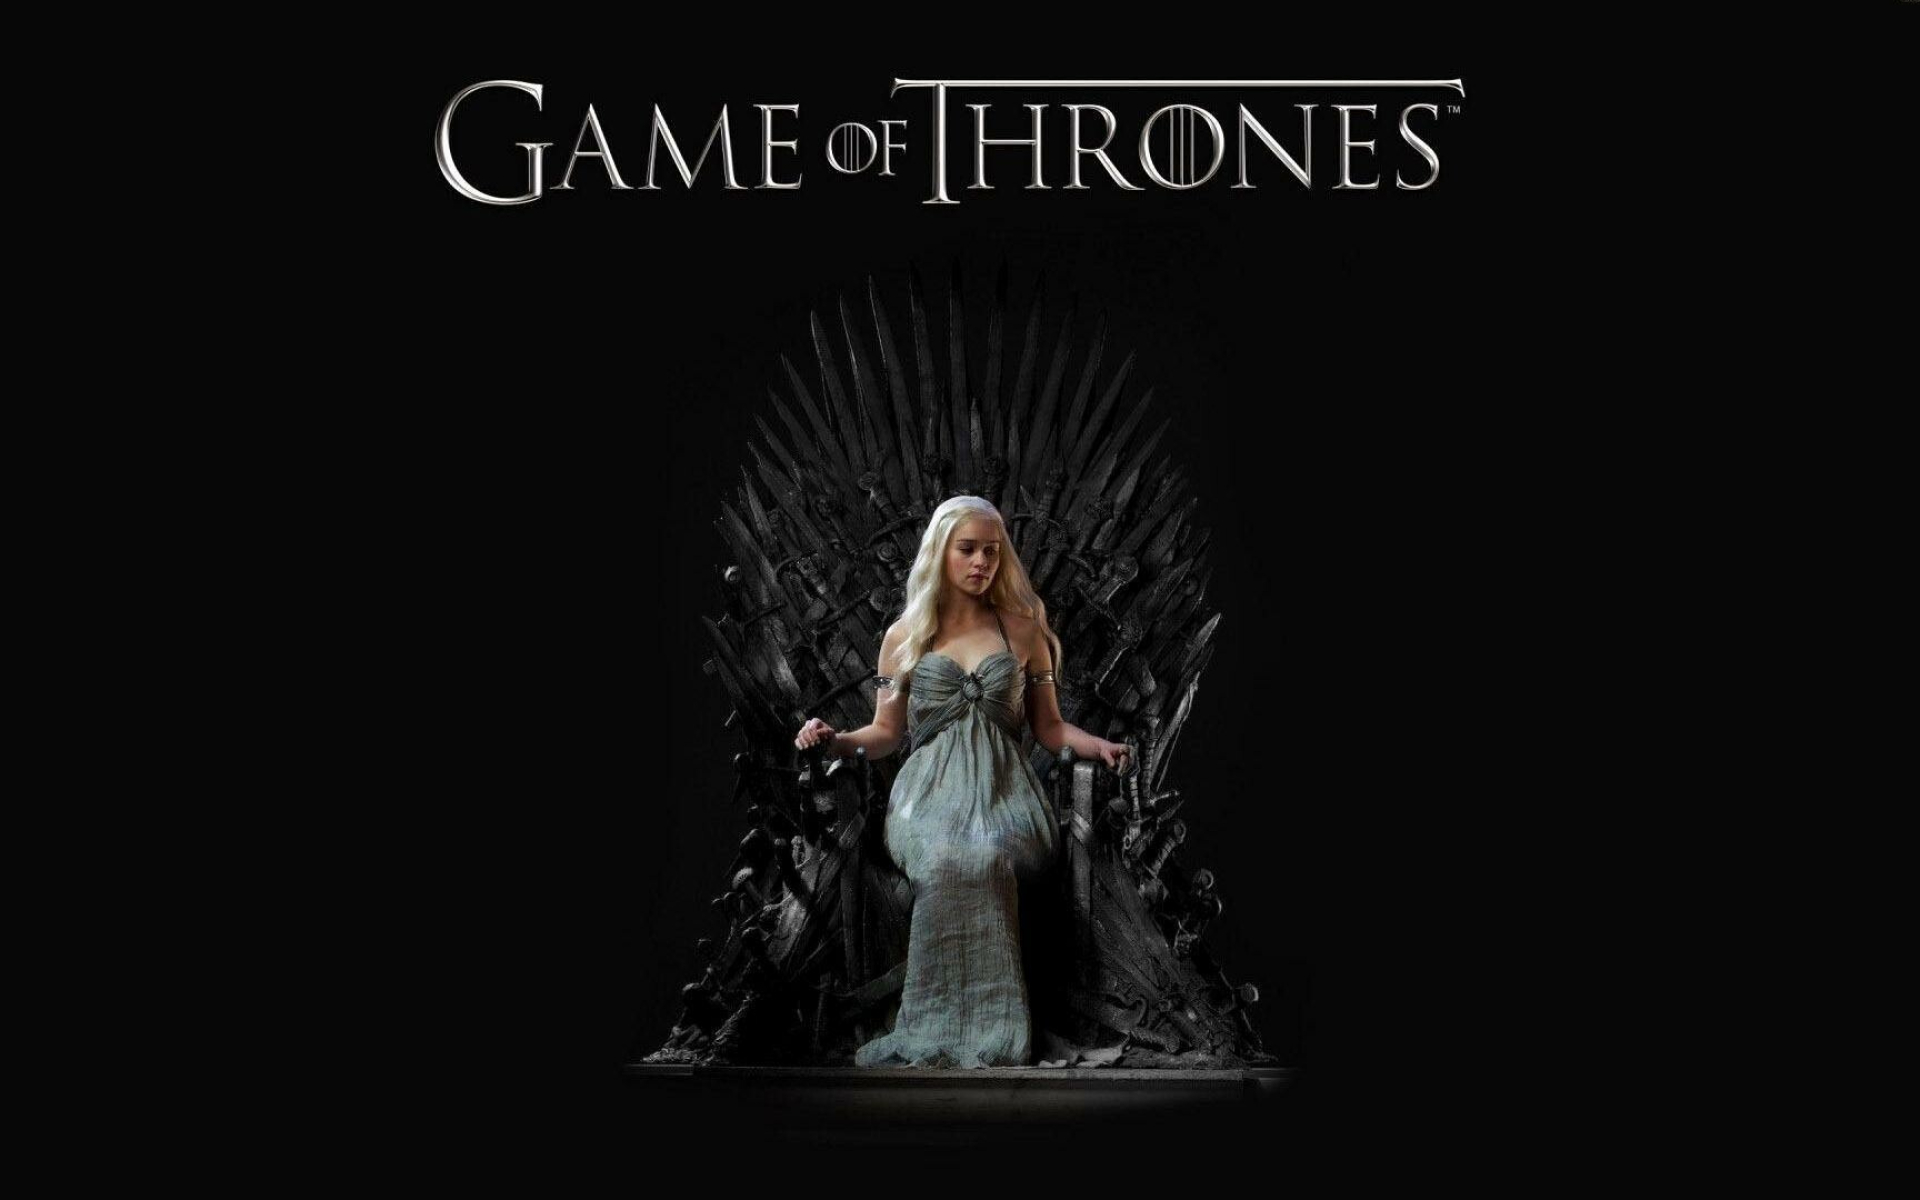 Game of Thrones: Daenerys Targaryen, was sold by her brother Viserys and Illyrio Mopatis into a marriage with Khal Drogo. 1920x1200 HD Background.